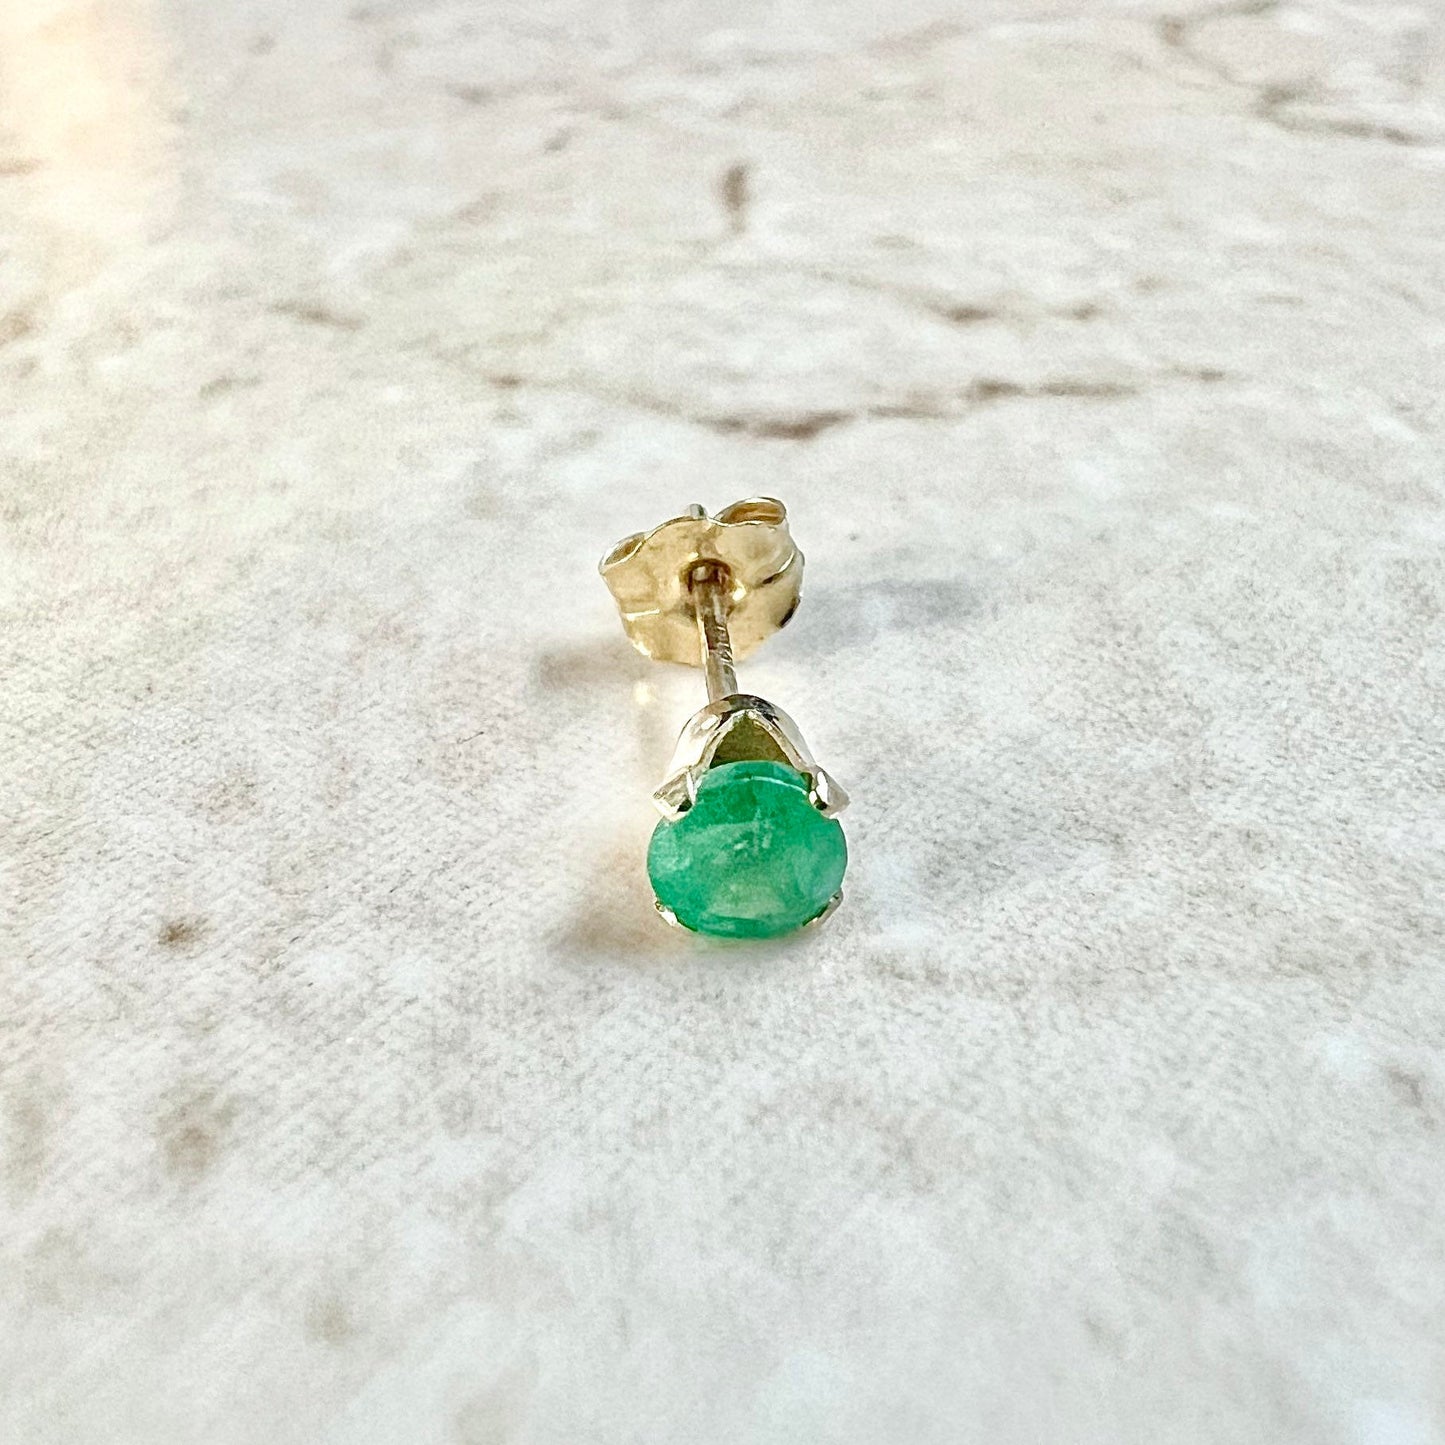 Single 14K Natural Emerald Stud Earring - Yellow Gold Emerald Stud - Genuine Emerald Earrings - May Birthstone Earrings - Best Gifts For Her